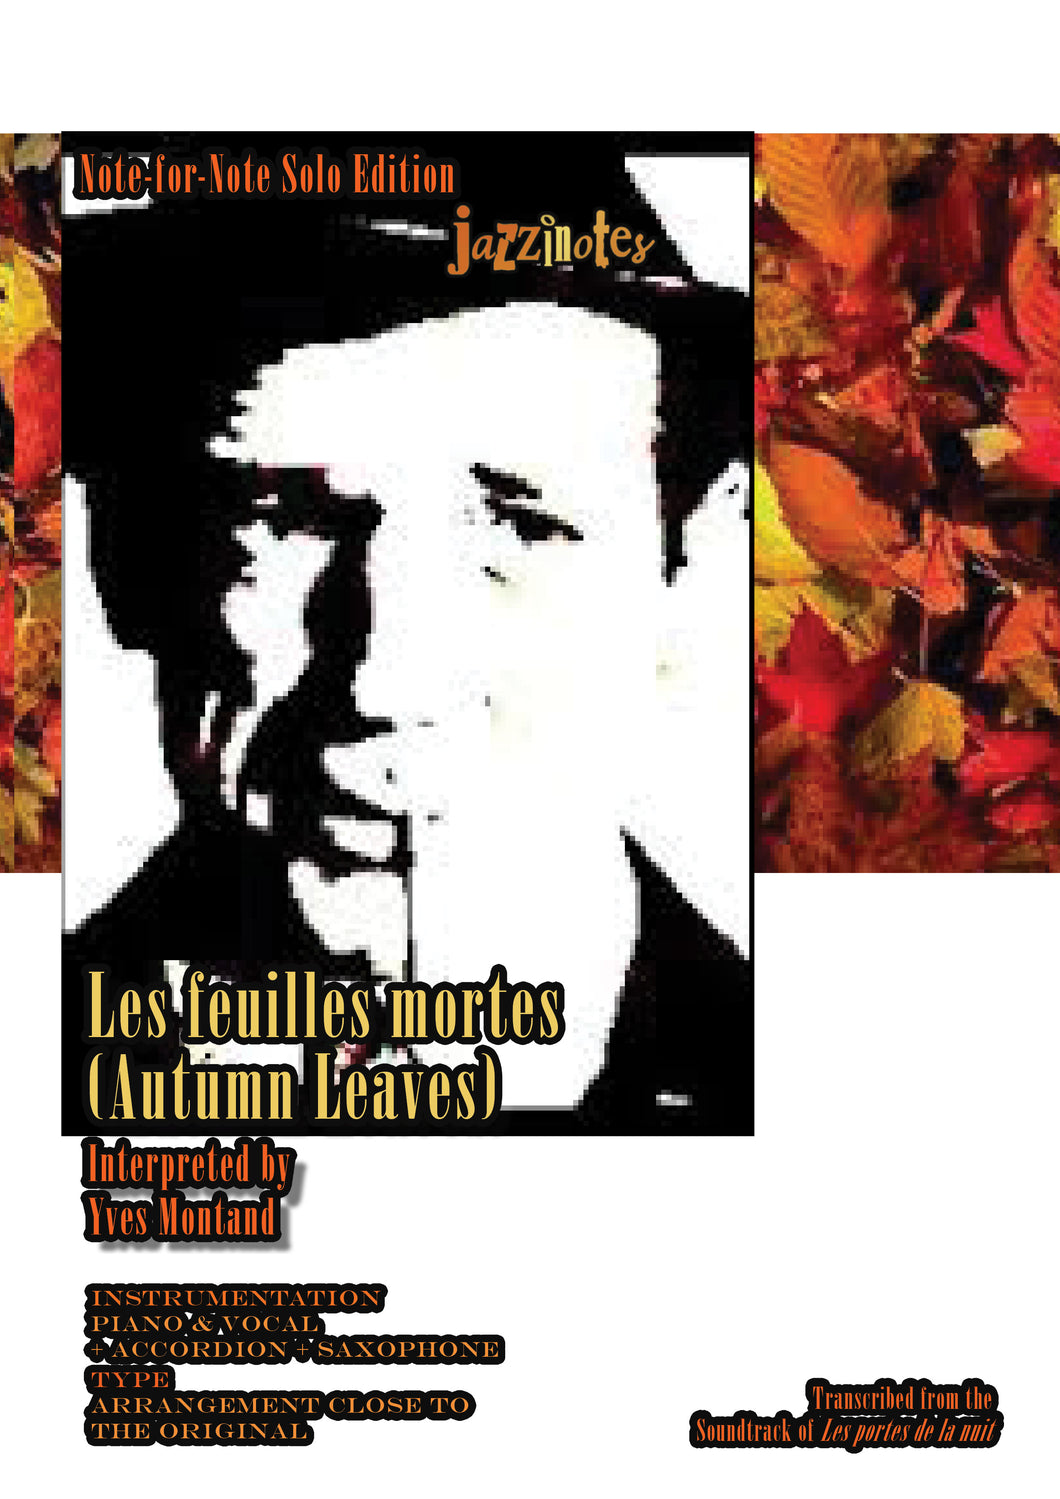 Montand, Yves: Les feuilles mortes (Autumn Leaves) - Sheet Music Download